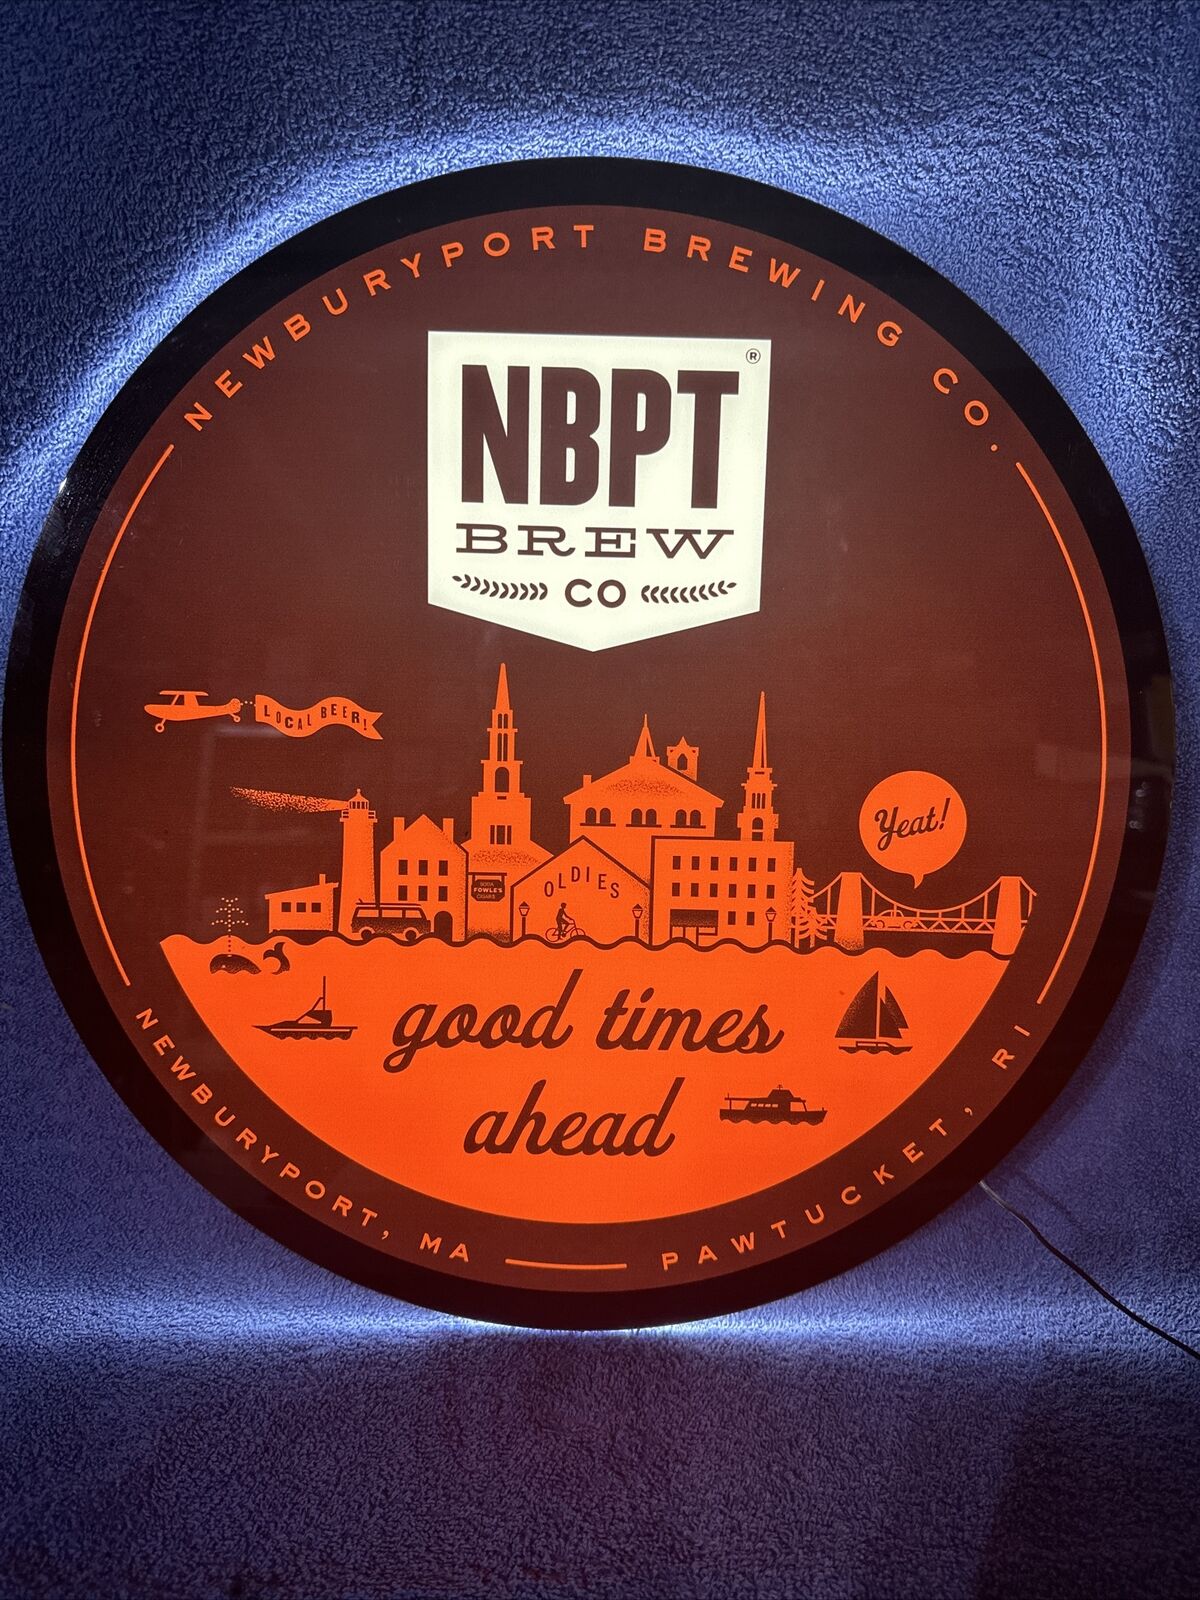 AWESOME NBPT NEWBURYPORT BREWING LIGHT UP LED BEER SIGN PAWTUCKET